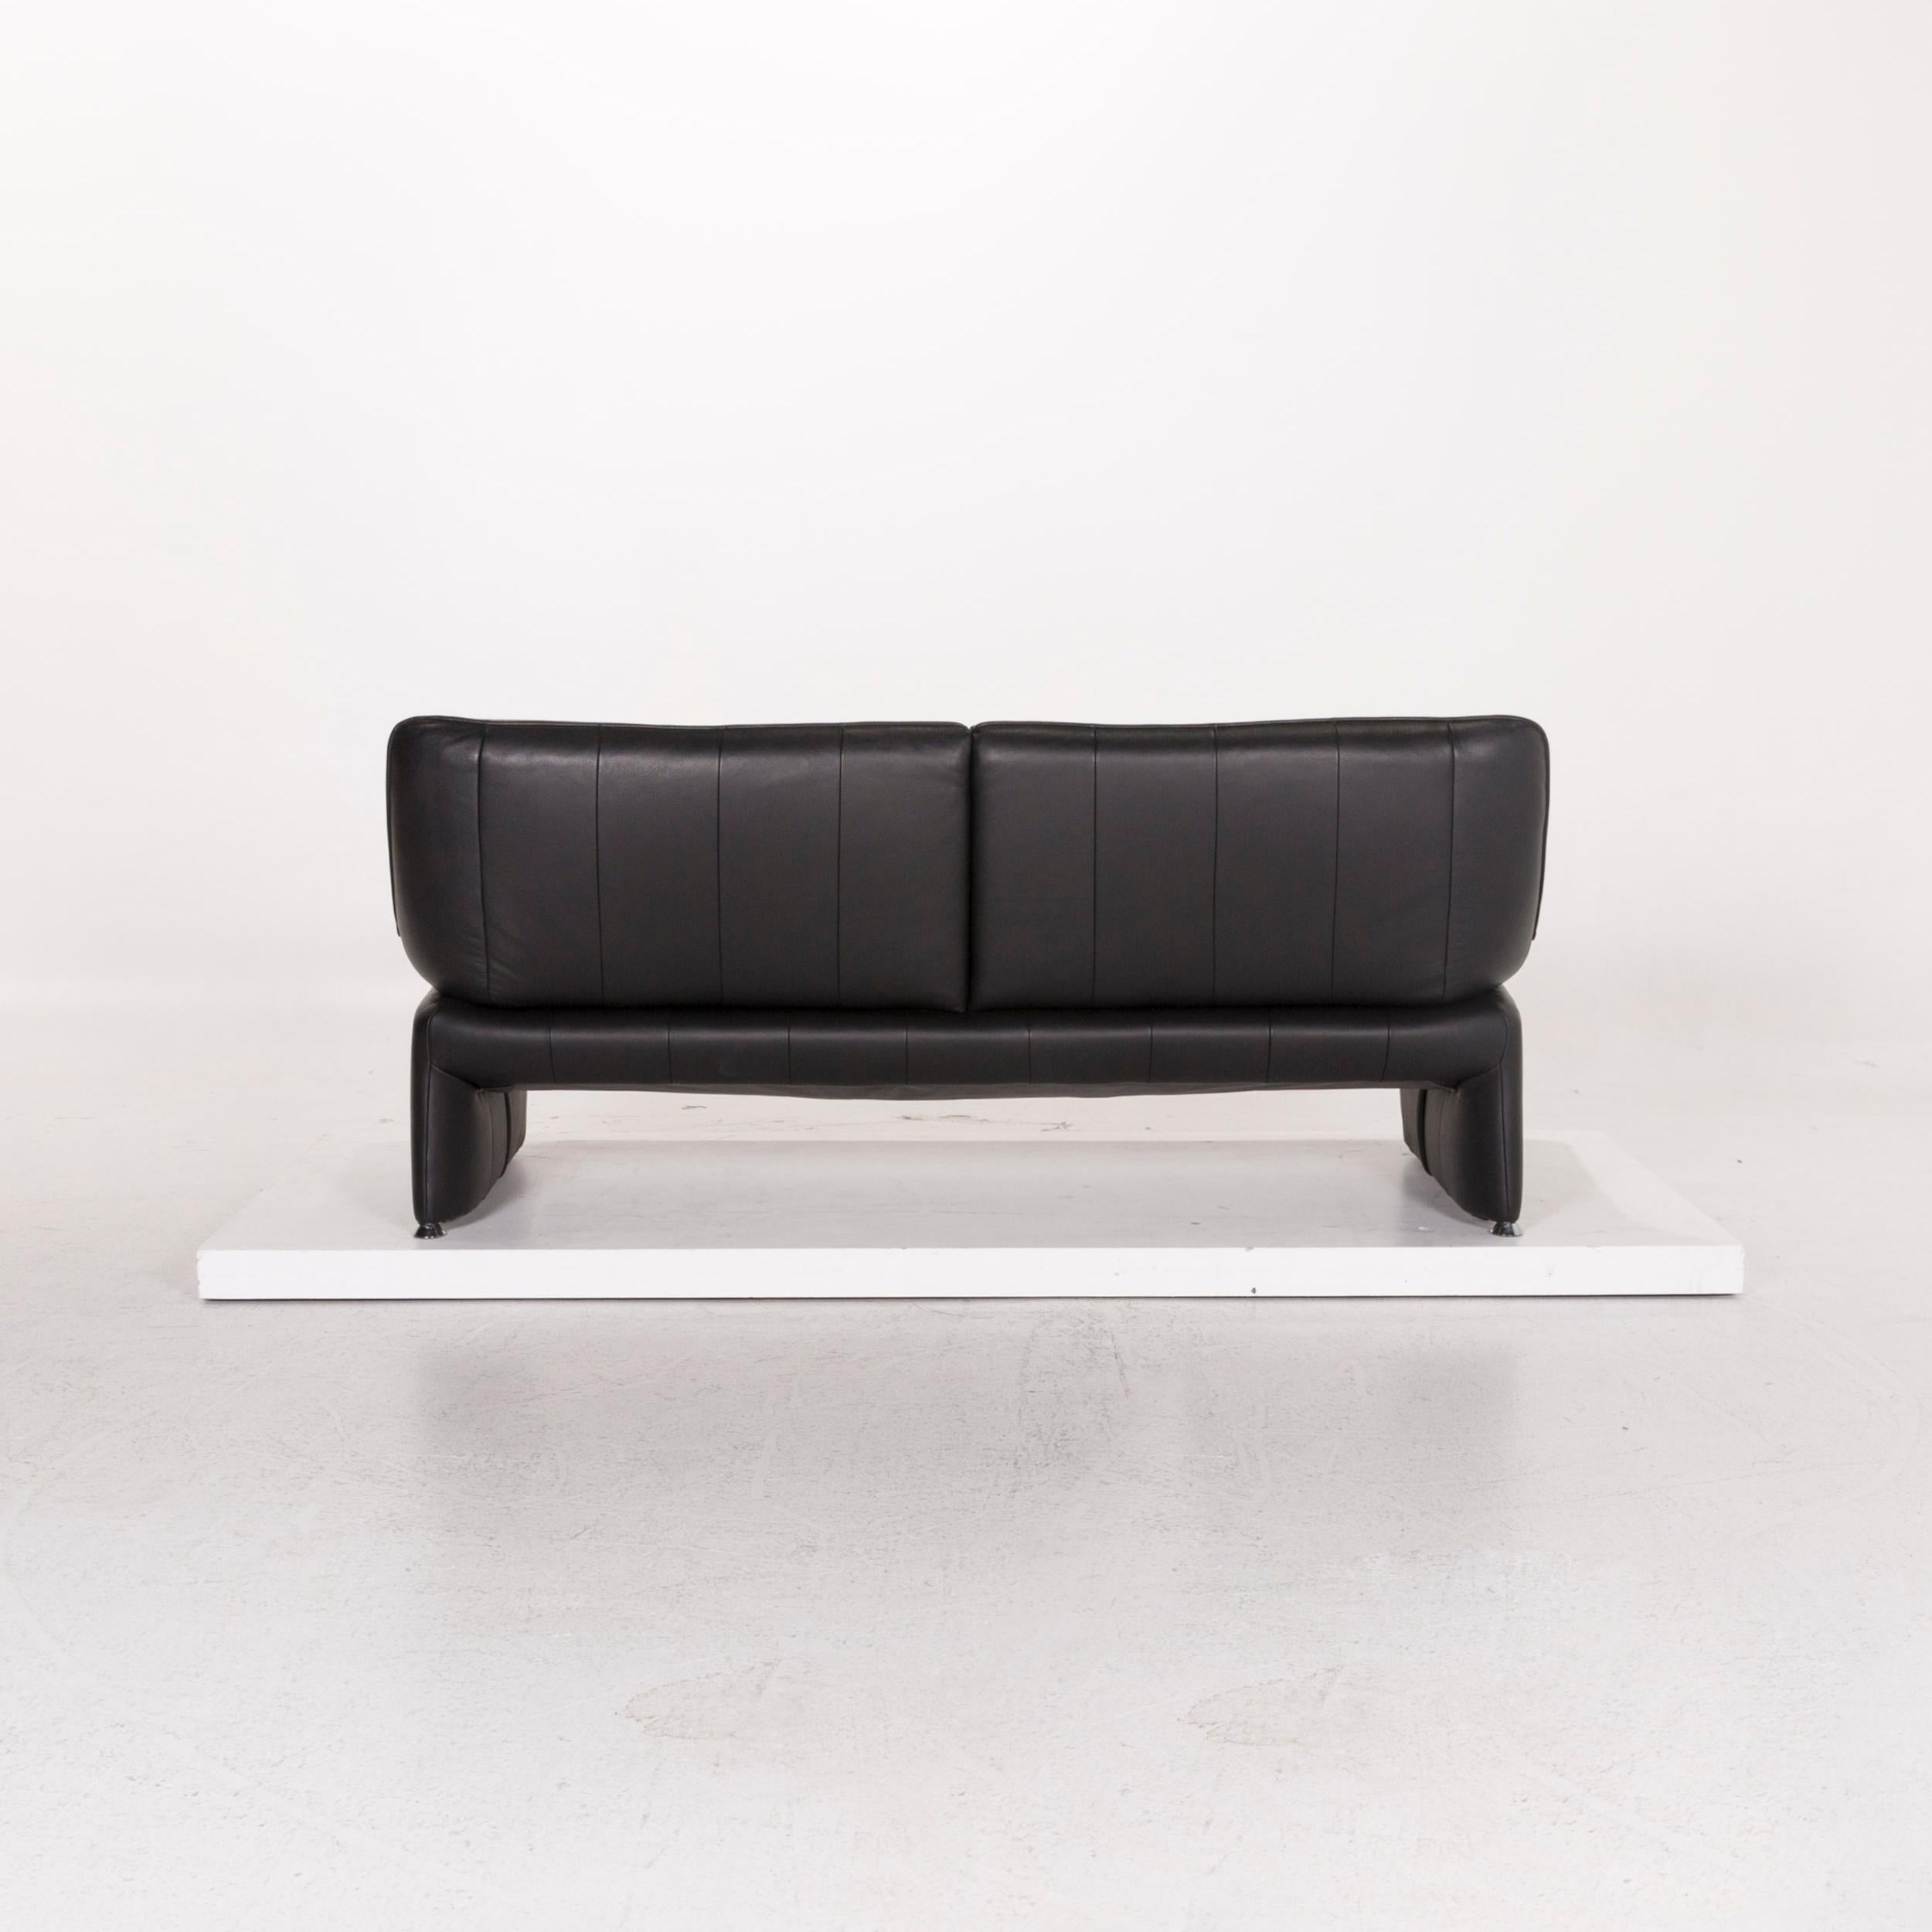 Contemporary Laauser Atlanta Leather Sofa Black Three-Seat Couch